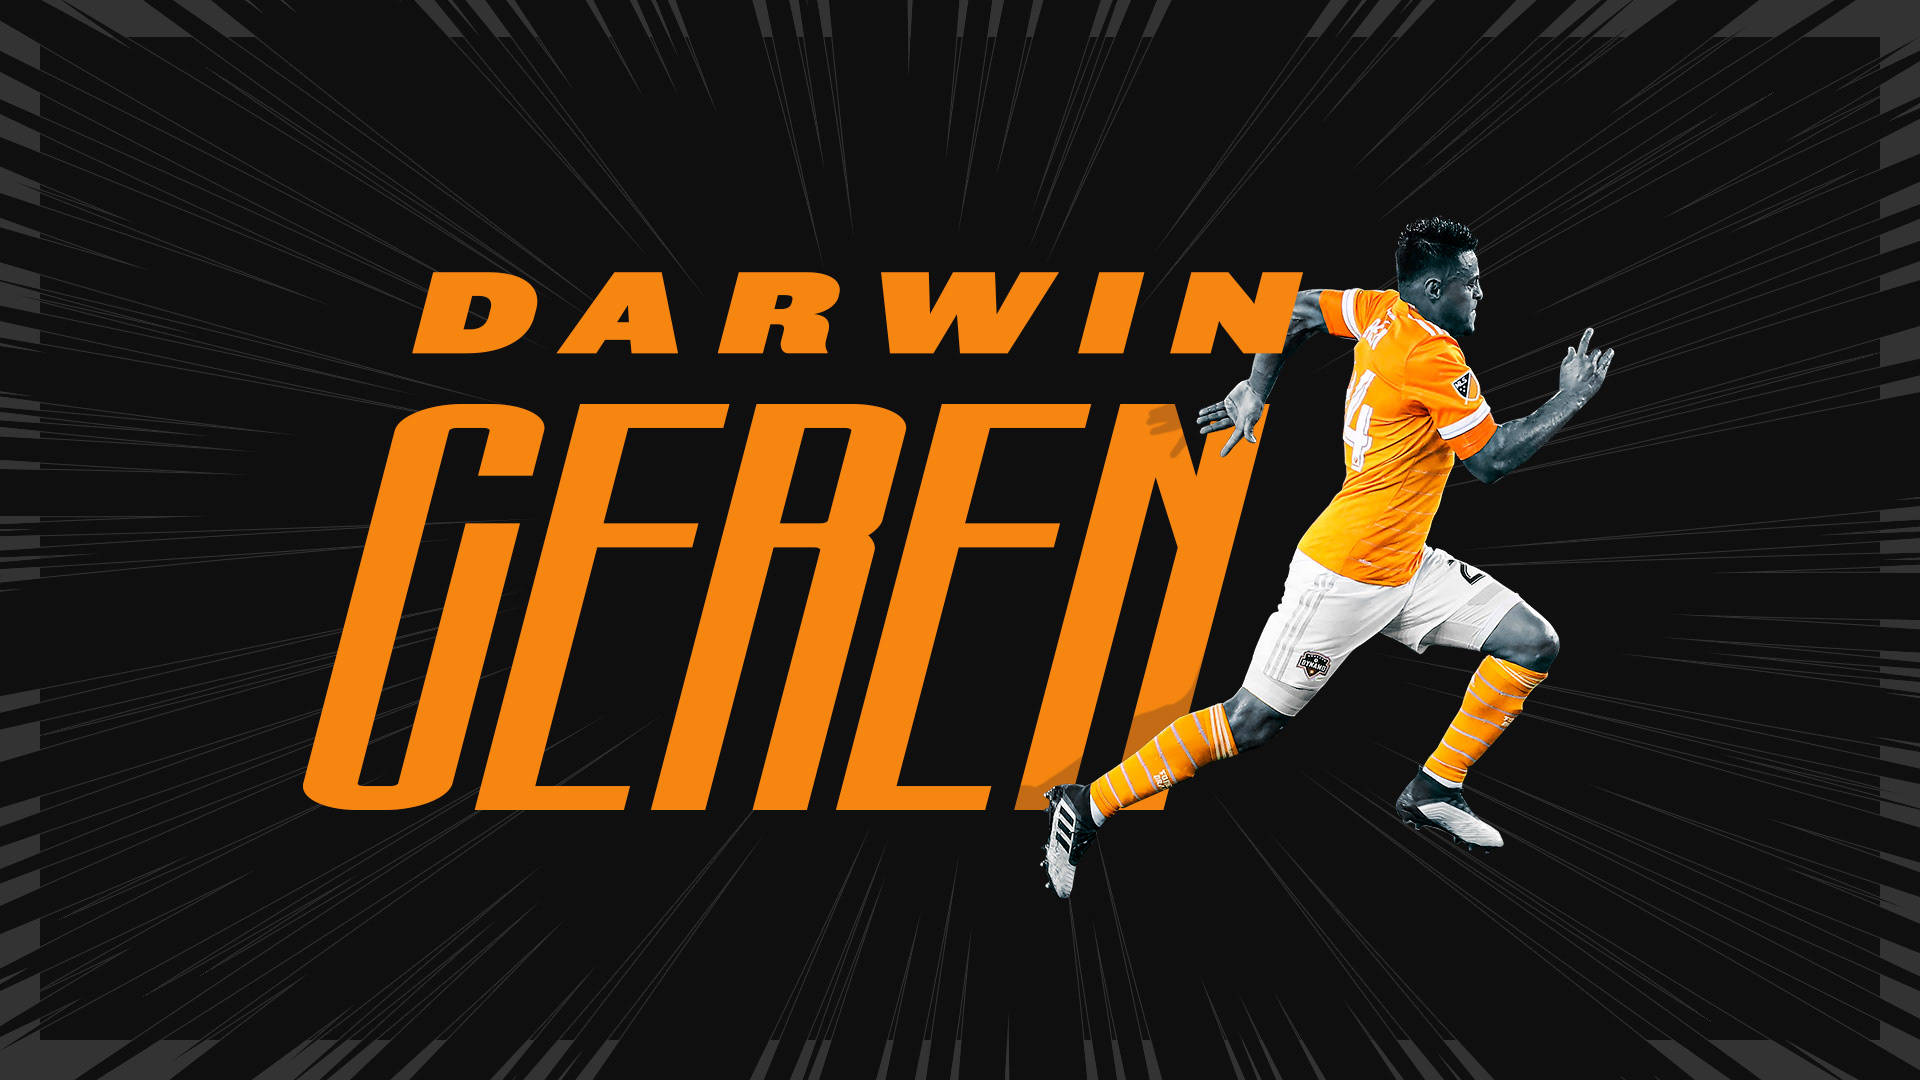 Houstondynamo Darwin Geren Is An American Professional Soccer Player Who Currently Plays As A Goalkeeper For Houston Dynamo. Wallpaper